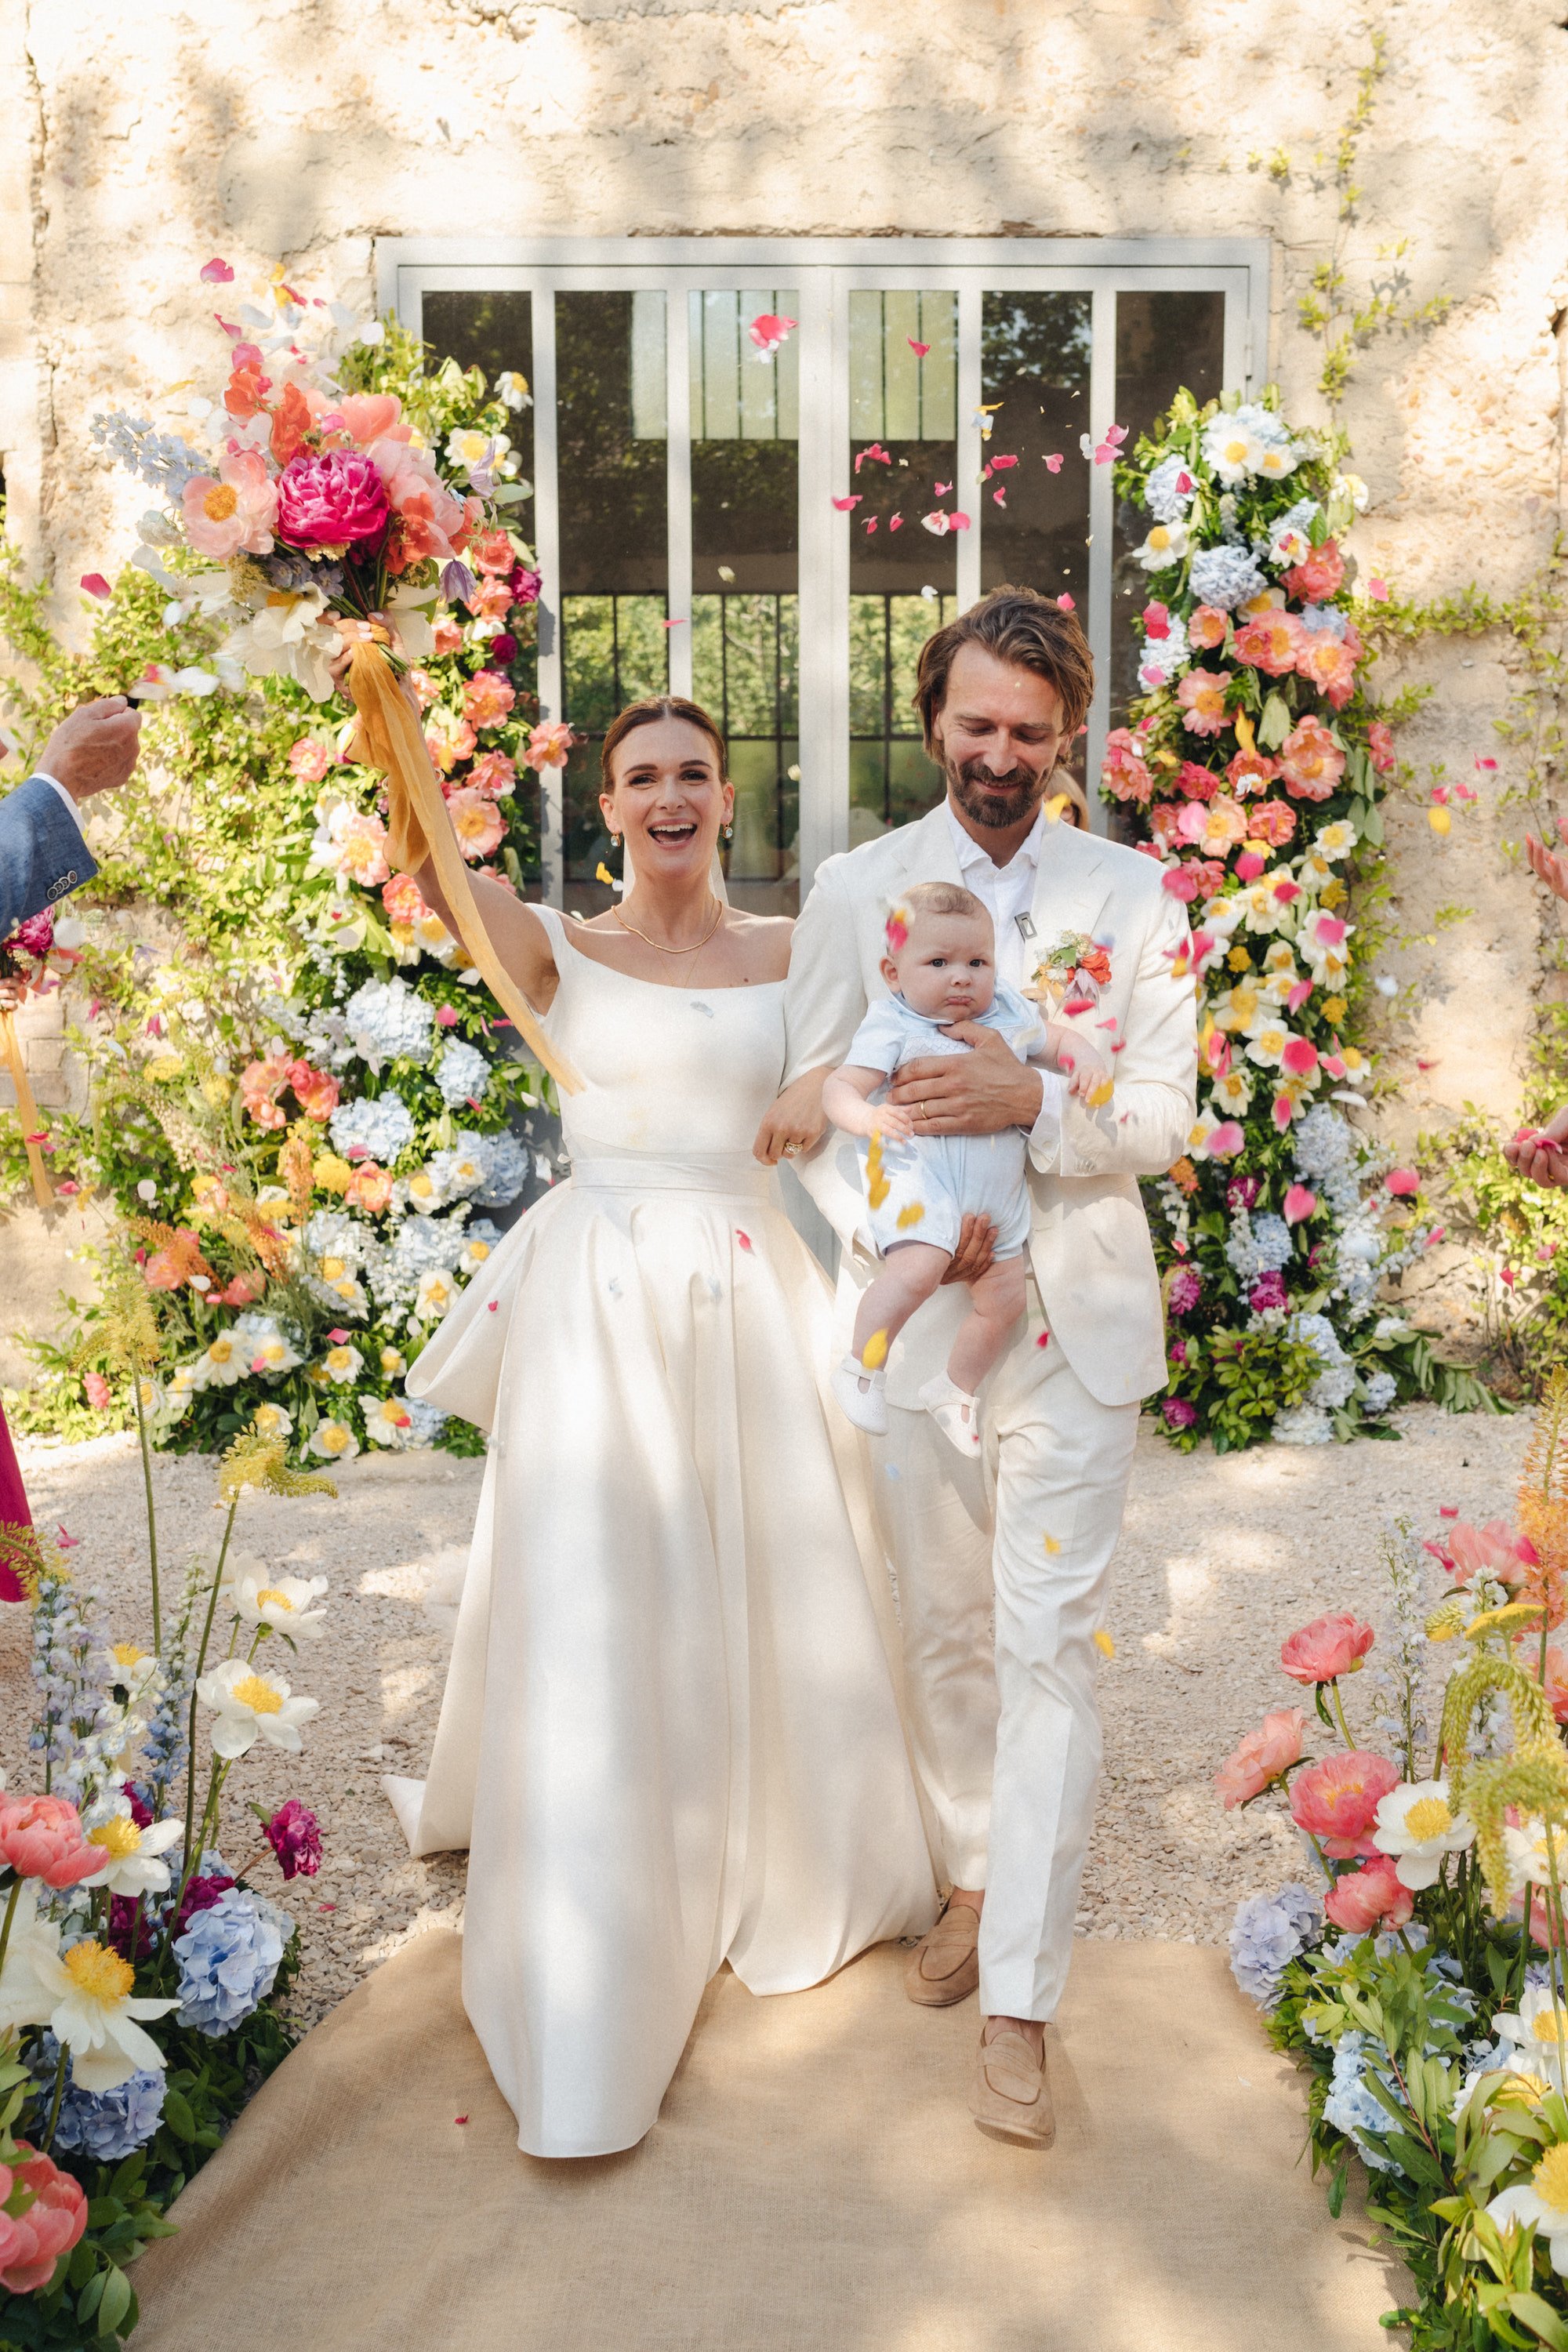 Gorgeous bride Naomi Ross wore a Halfpenny London wedding dress for her special day